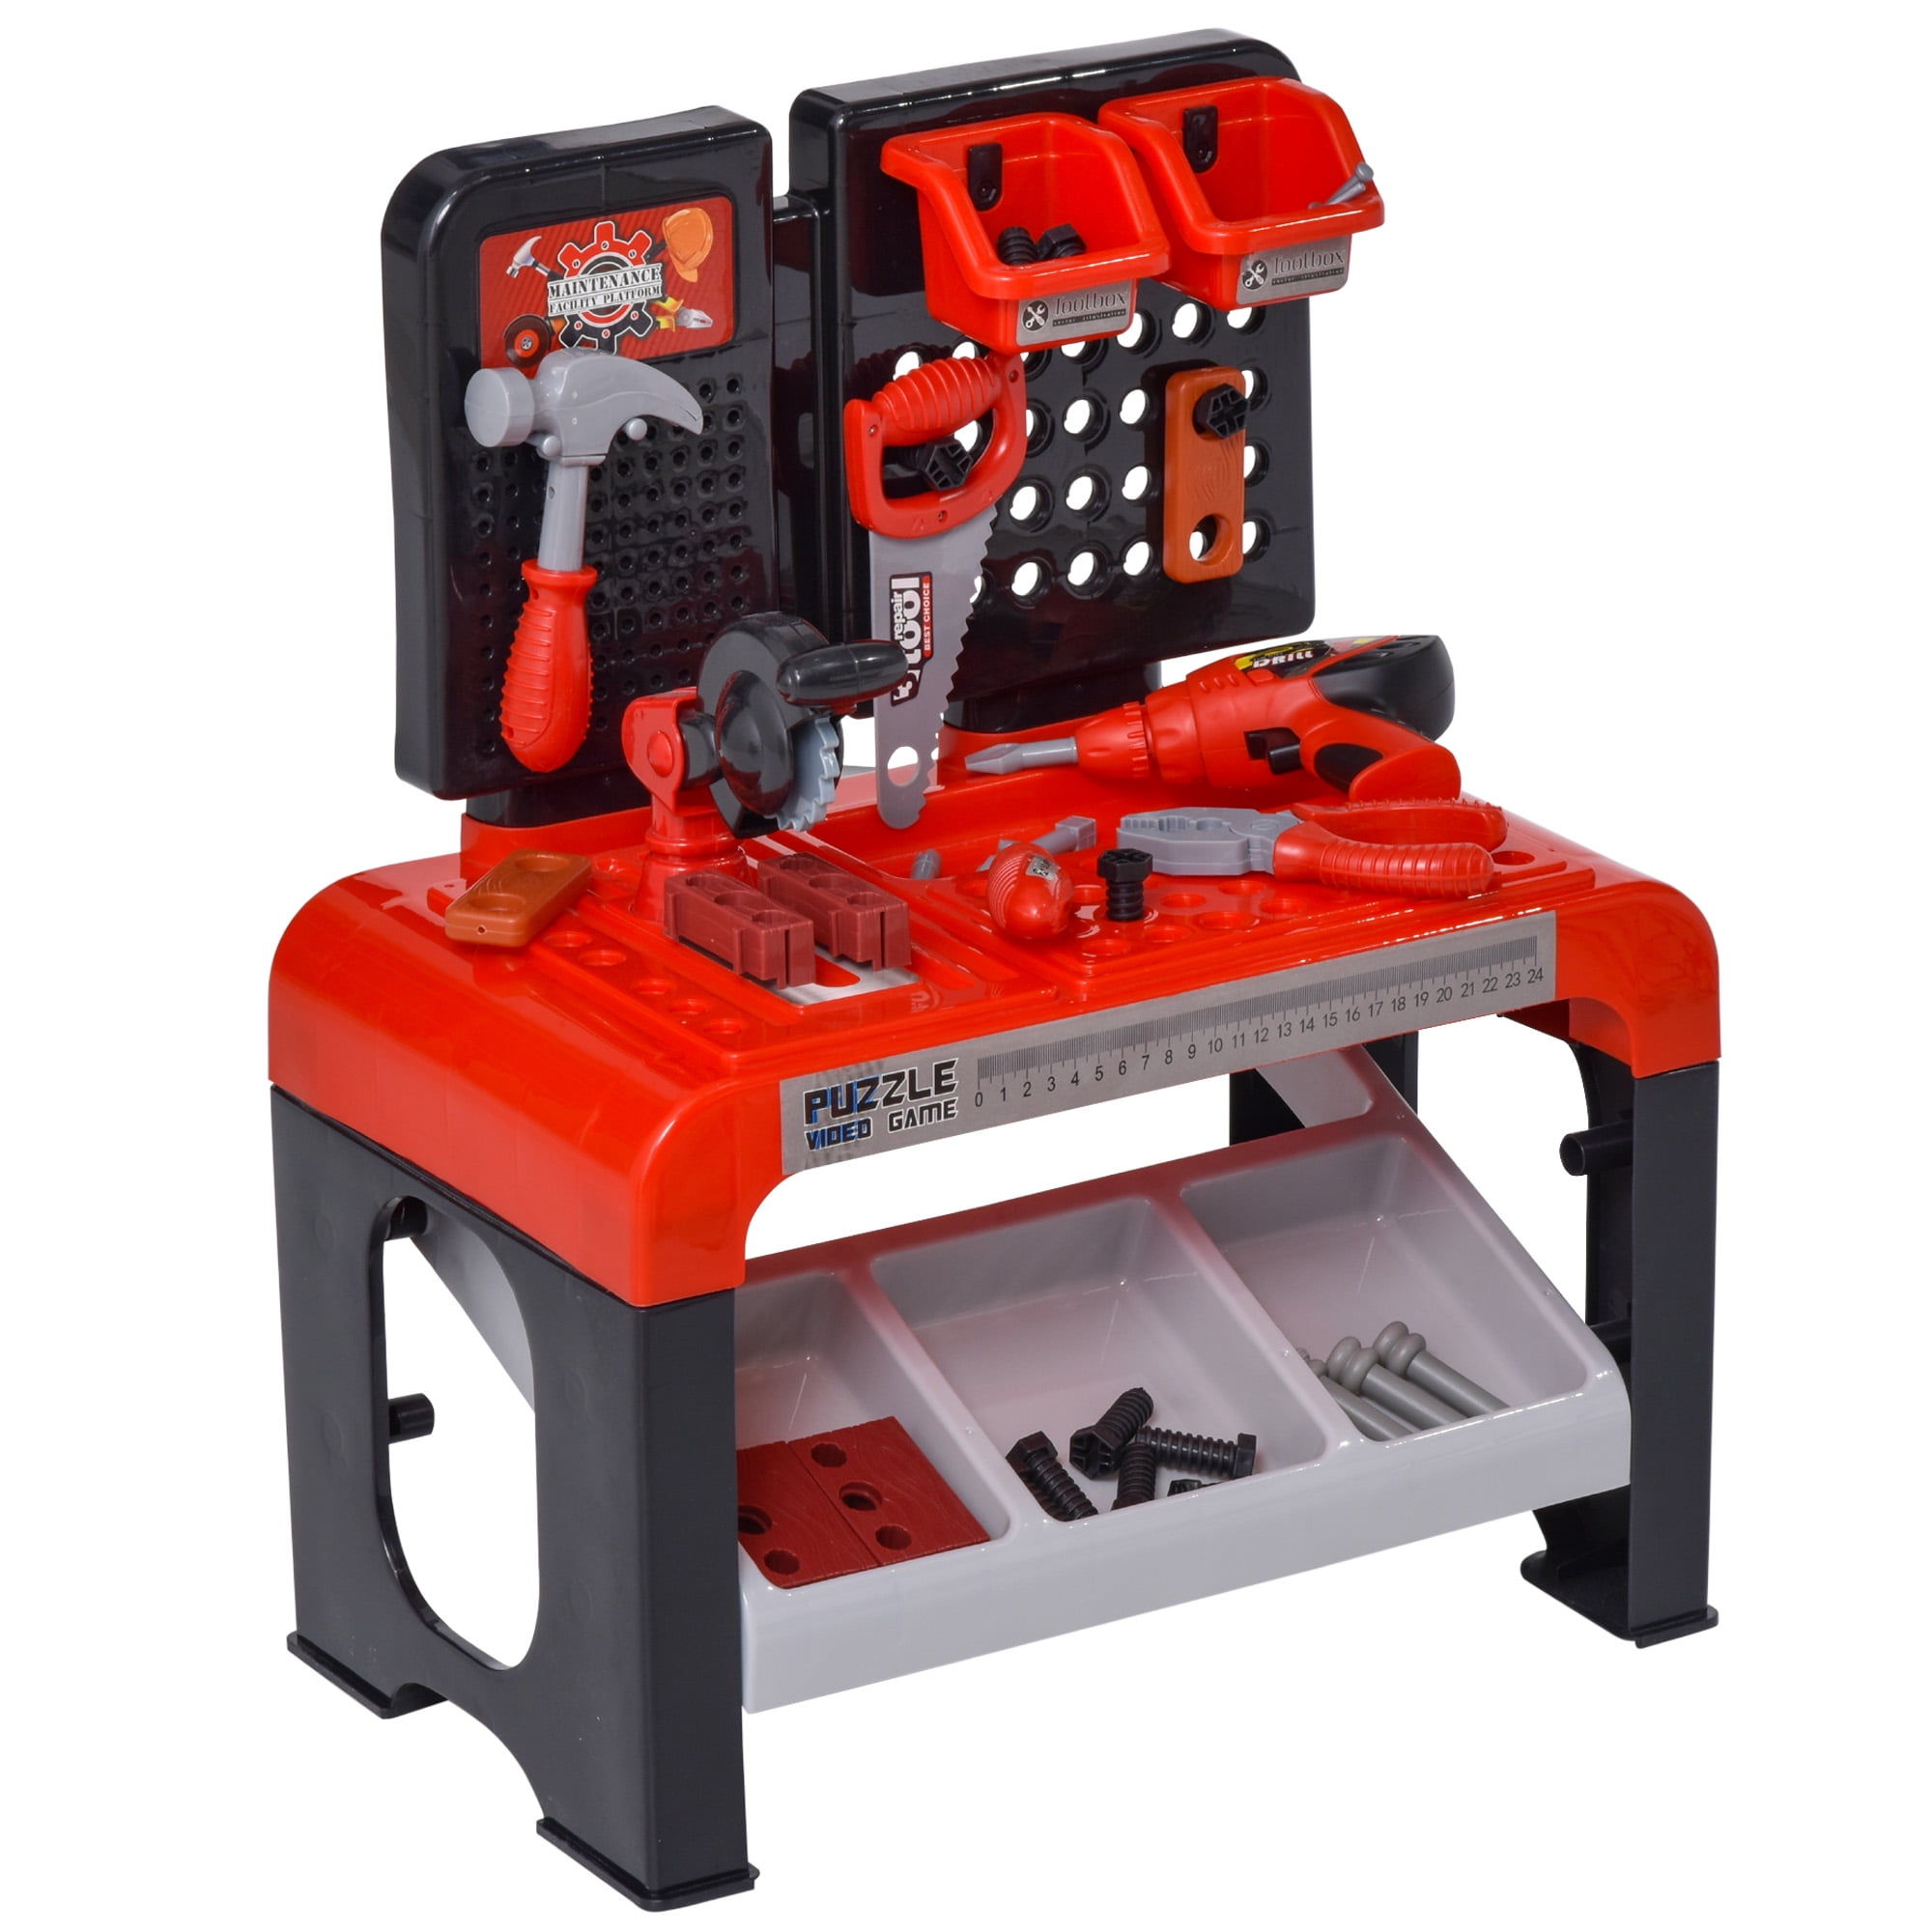 Toy workbench walmart tightvnc no security types supported shoulder